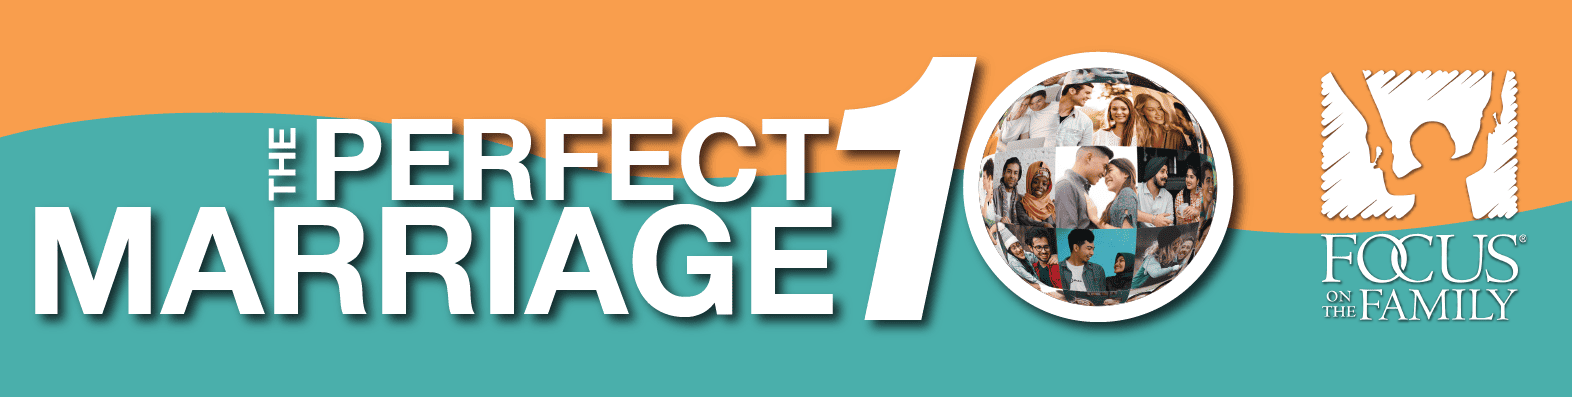 perfect 10 marriage event logo